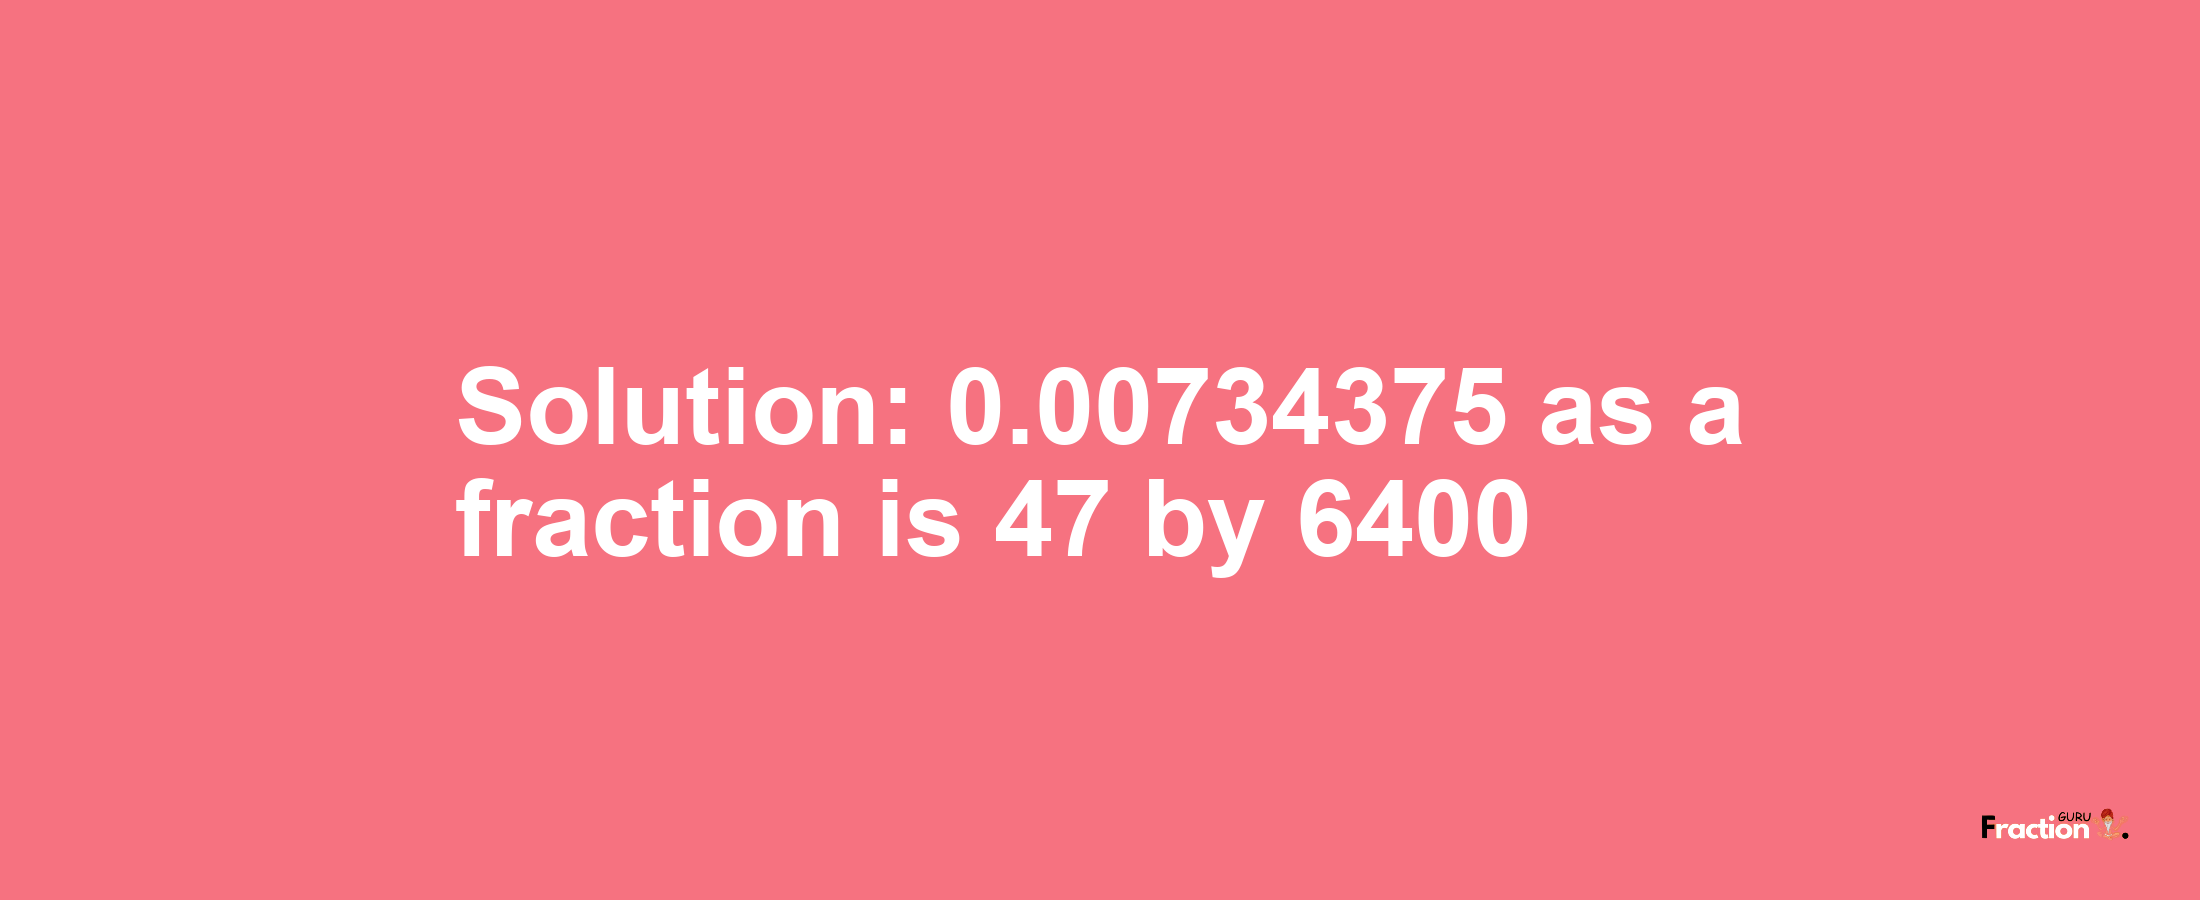 Solution:0.00734375 as a fraction is 47/6400